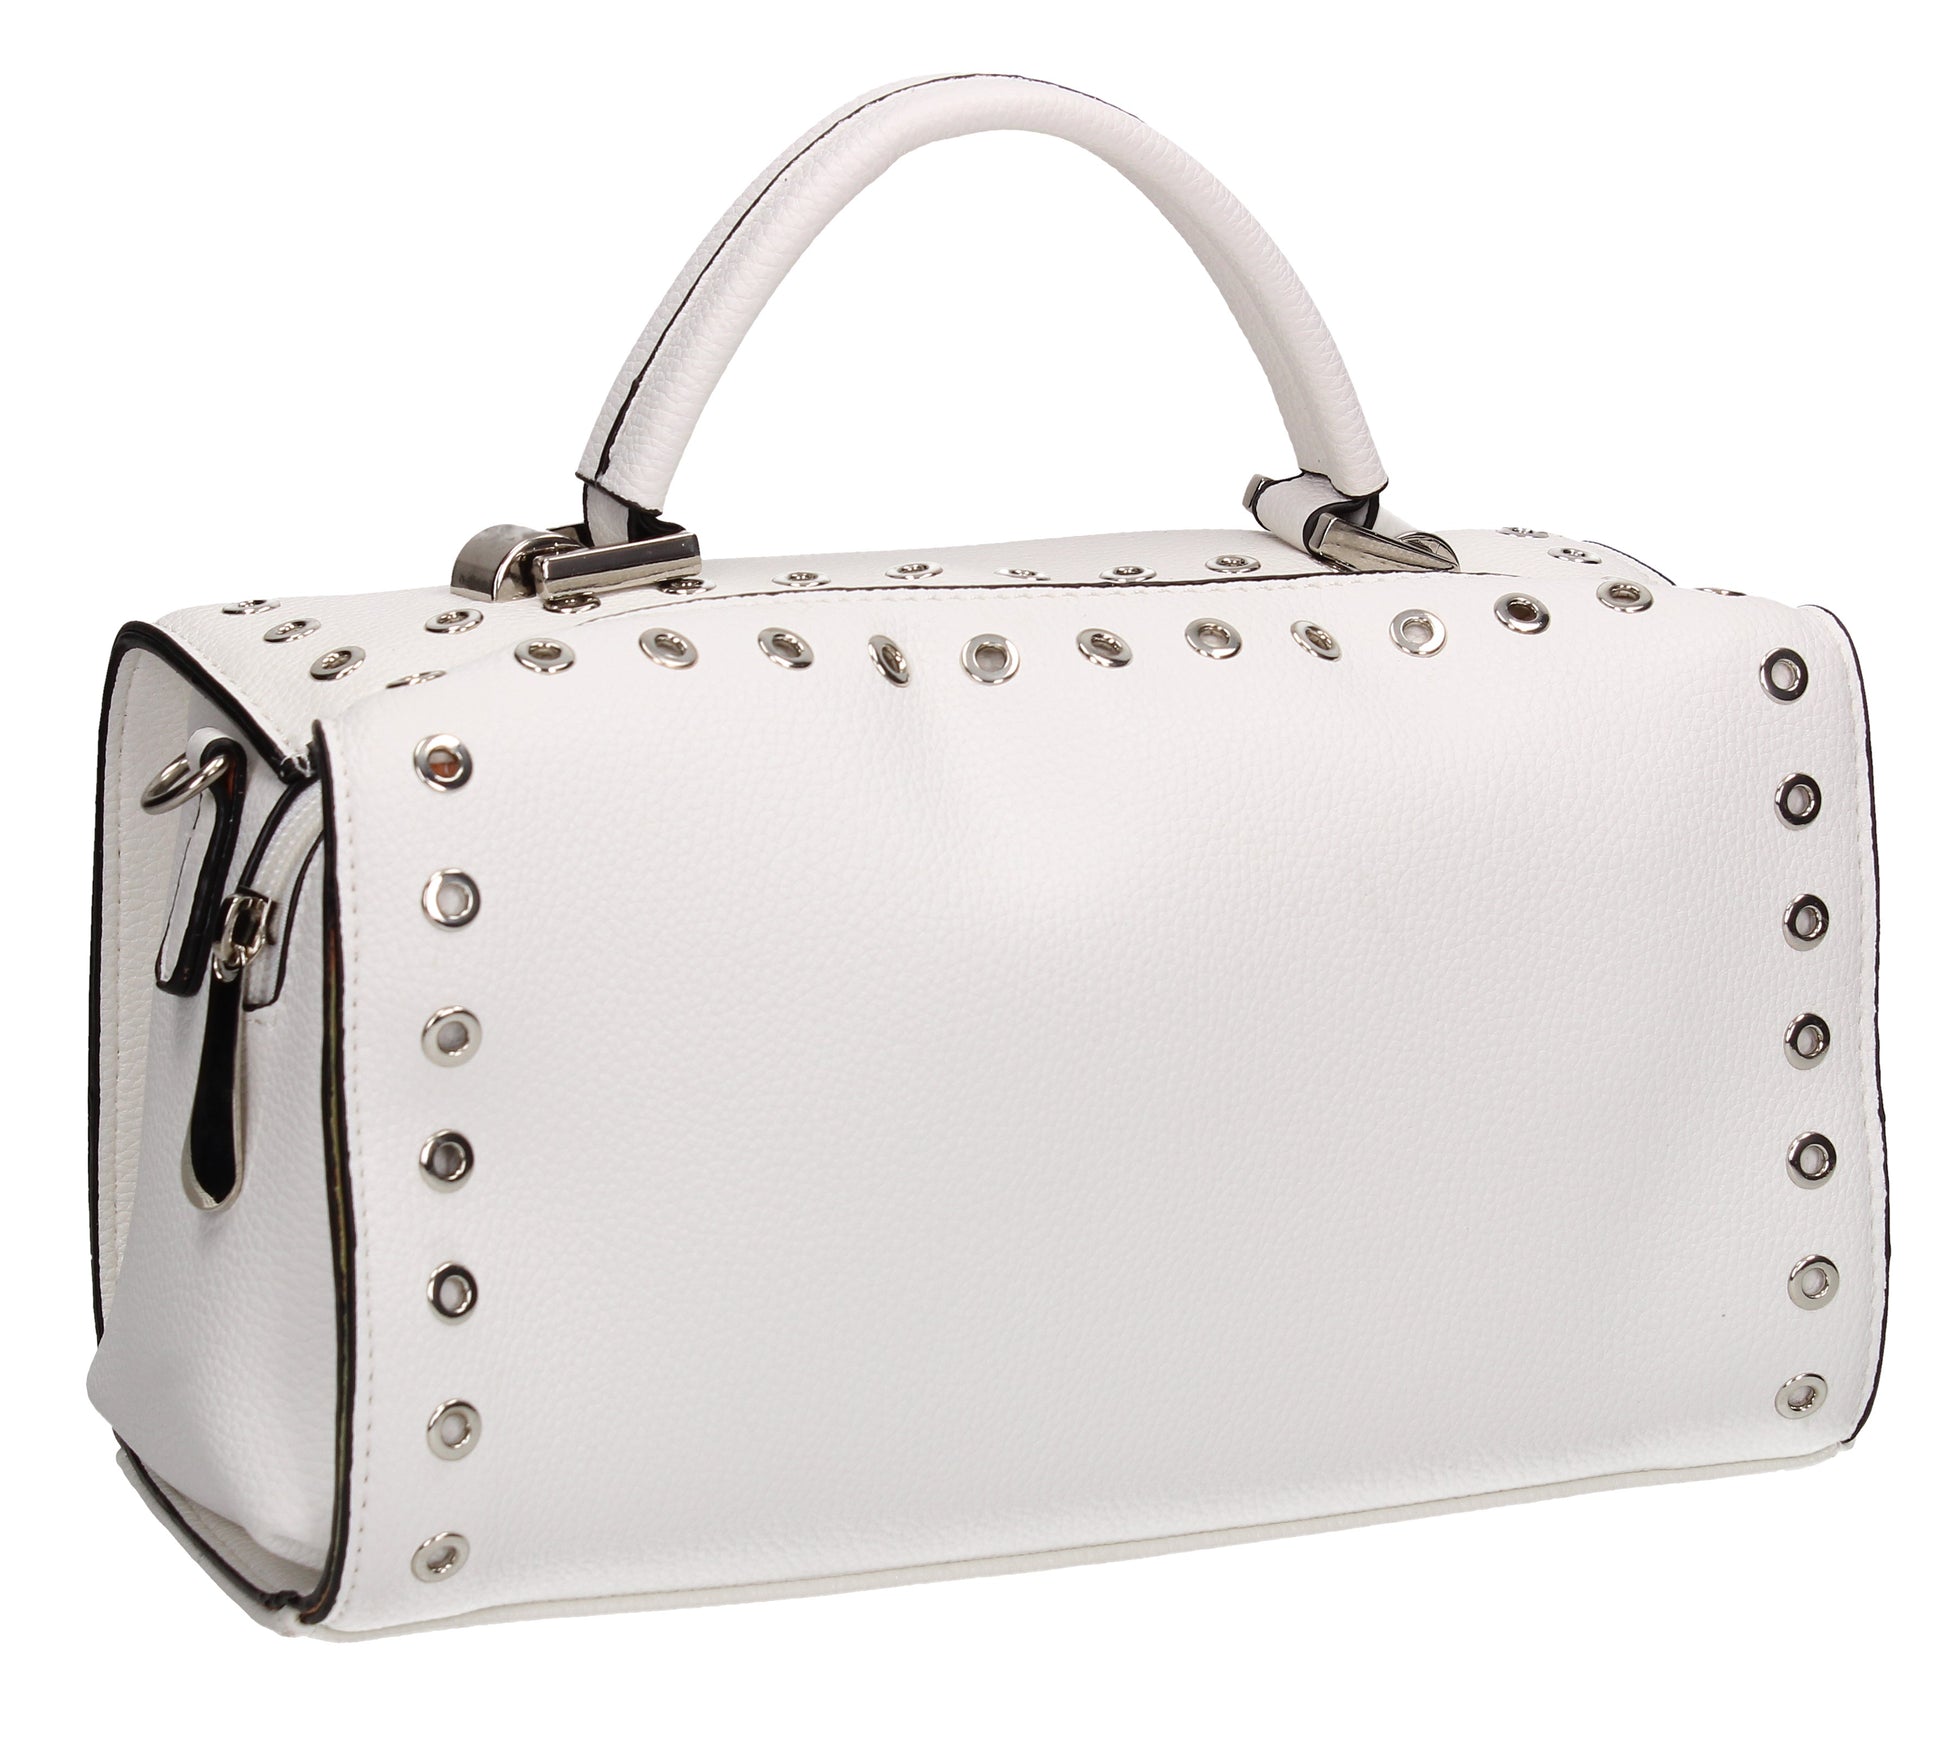 Buy your Anna Handbag White Today! Buy with confidence from Swankyswans